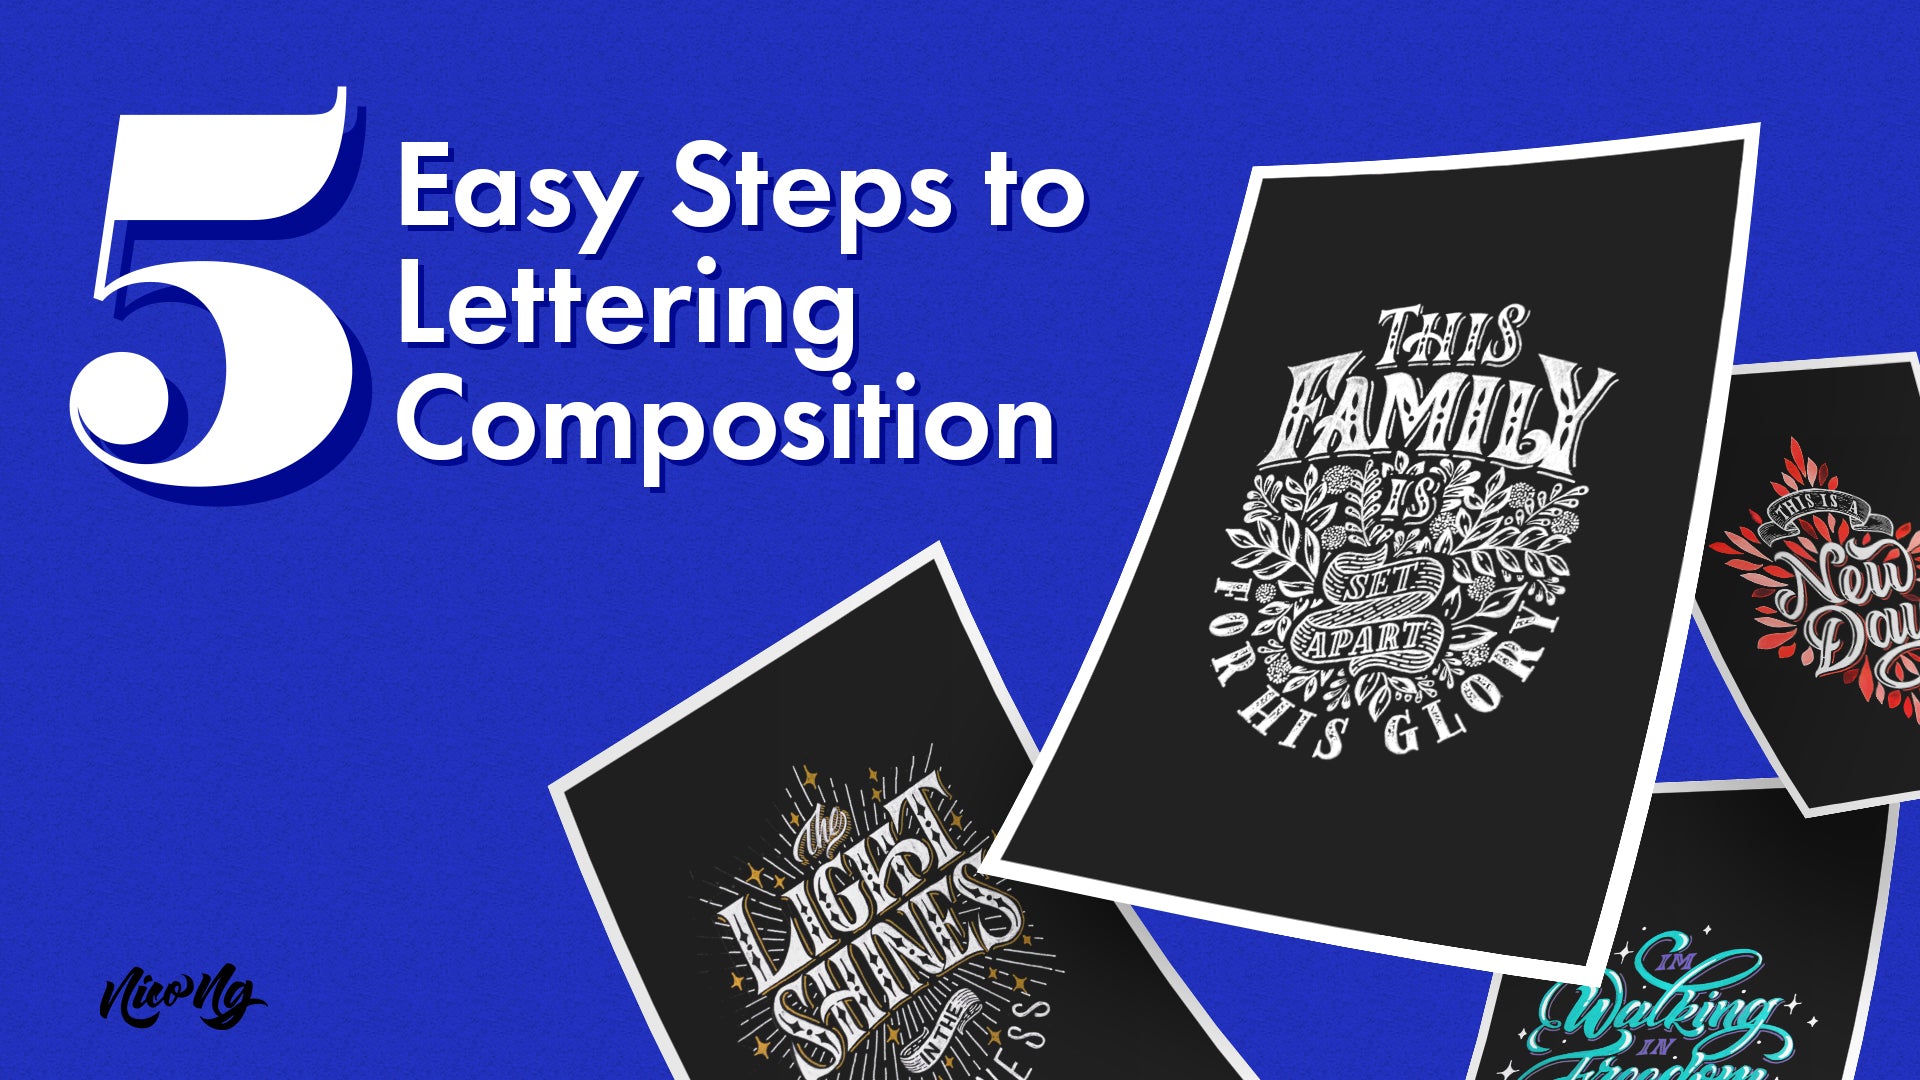 5 Easy Steps to Lettering Composition